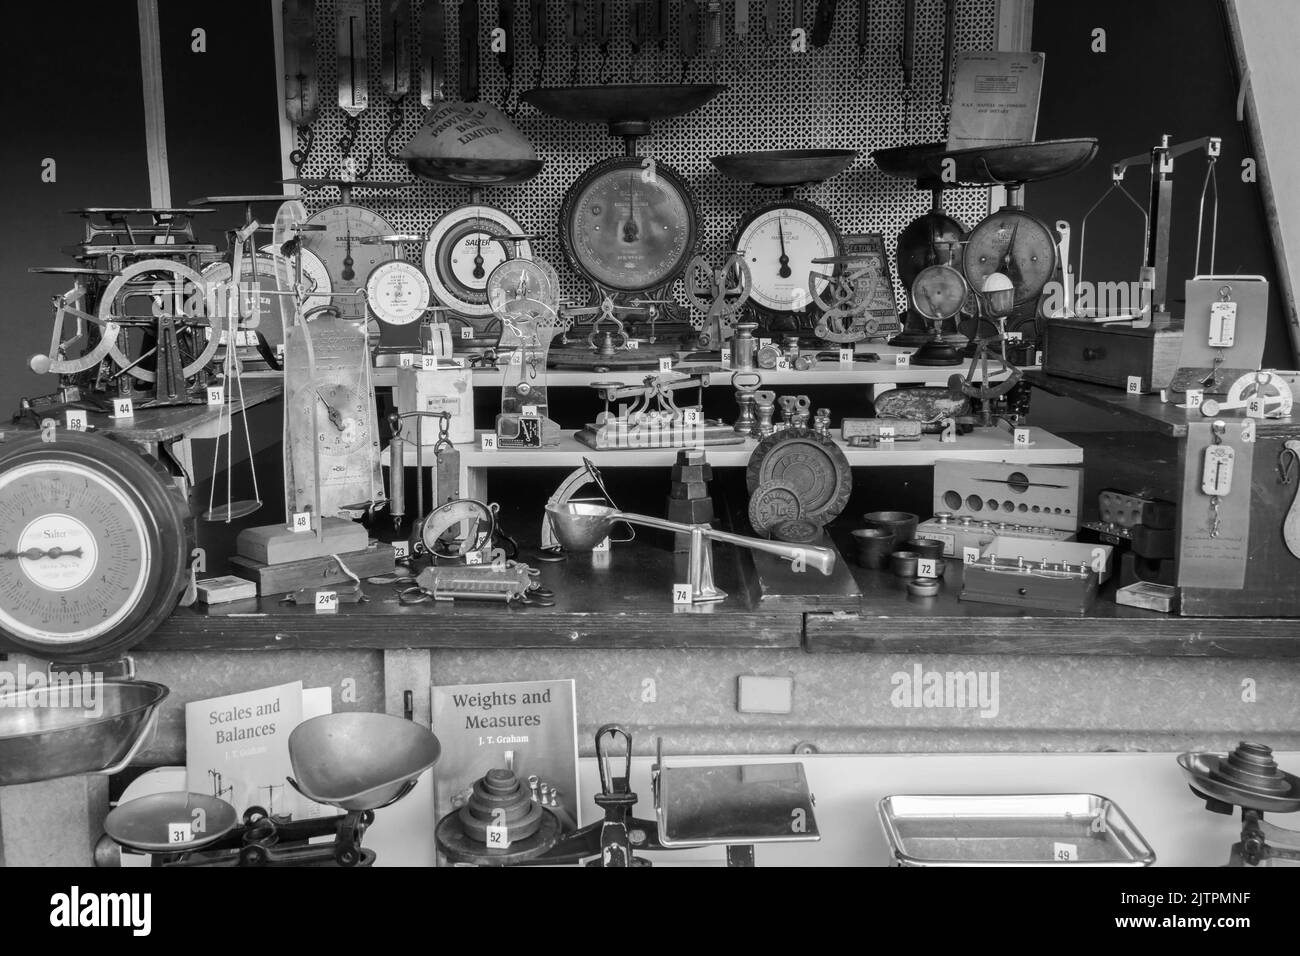 A collection of Weights and Measuring devices on display at Kington Vintage Show, Herefordshire England UK. August 2022 Stock Photo